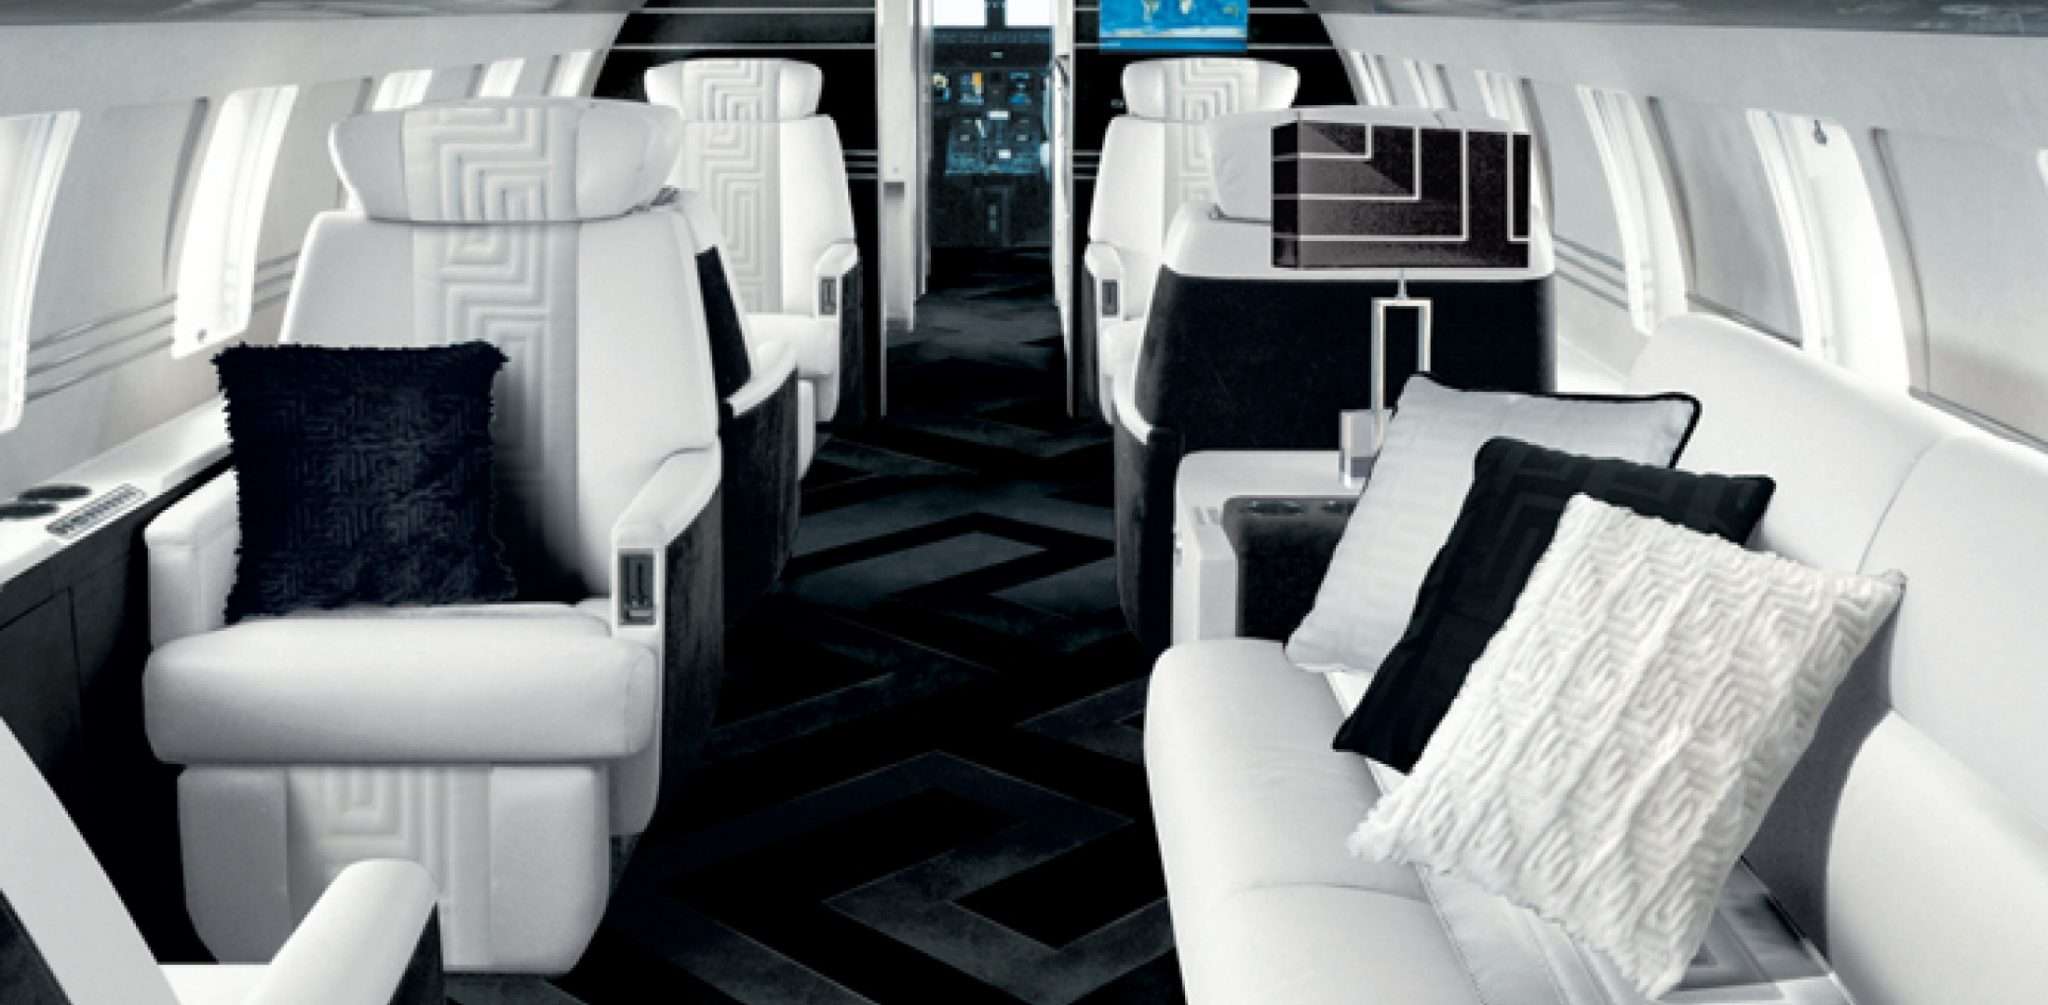 Luxury Private Jets Take Interior Design To New Heights Stratos